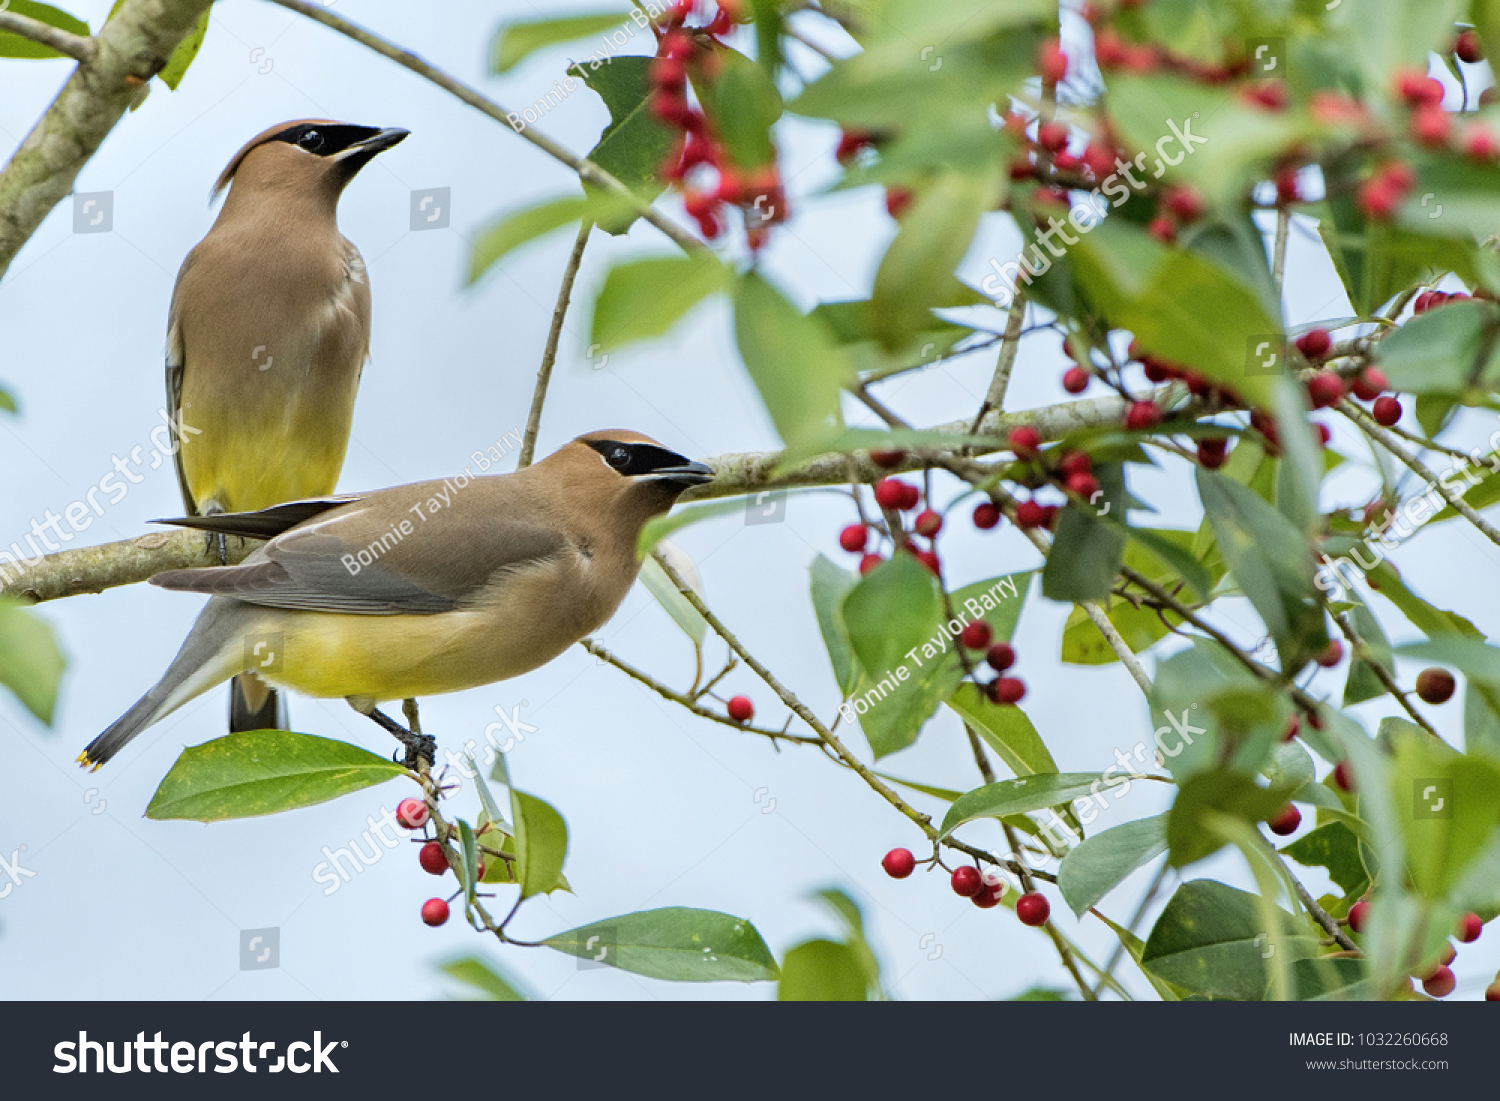 Two Cedar Waxwings on Berry Laden Branches #1032260668